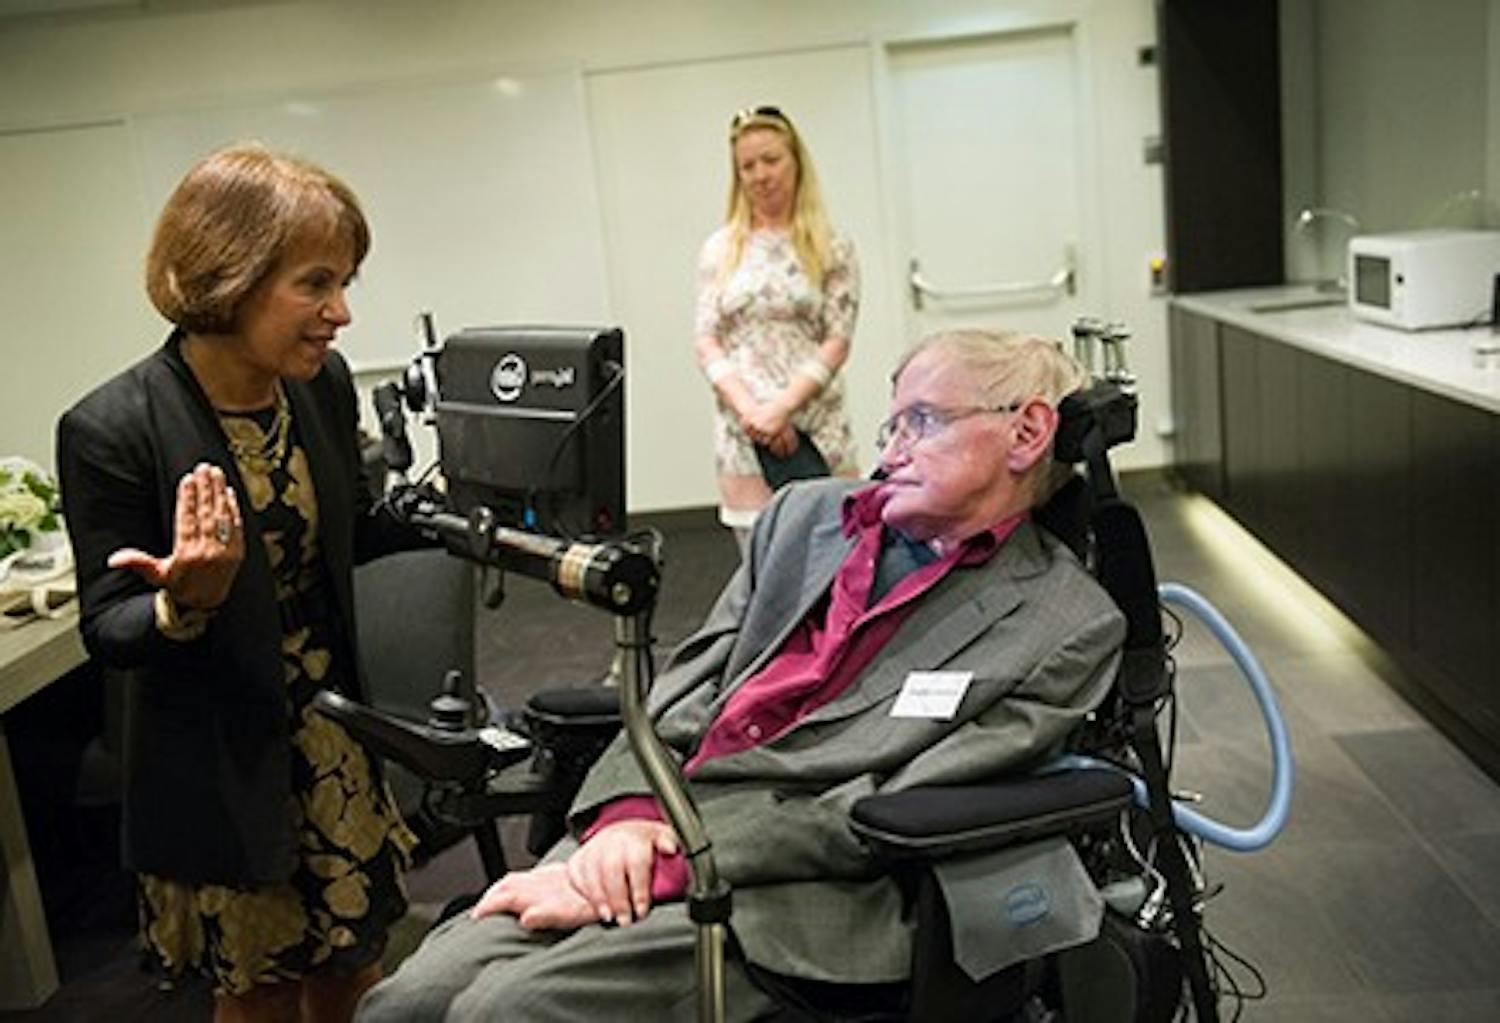 2015 August 24:th  Stephen Hawking Lecture in Waterfront Stockholm

Copyright: Photographer Ulf Sirborn, Box 38081, 100 64 Stockholm, Sweden,
phone +46 720461654, e-mail:ulf.sirborn@brevet.nu